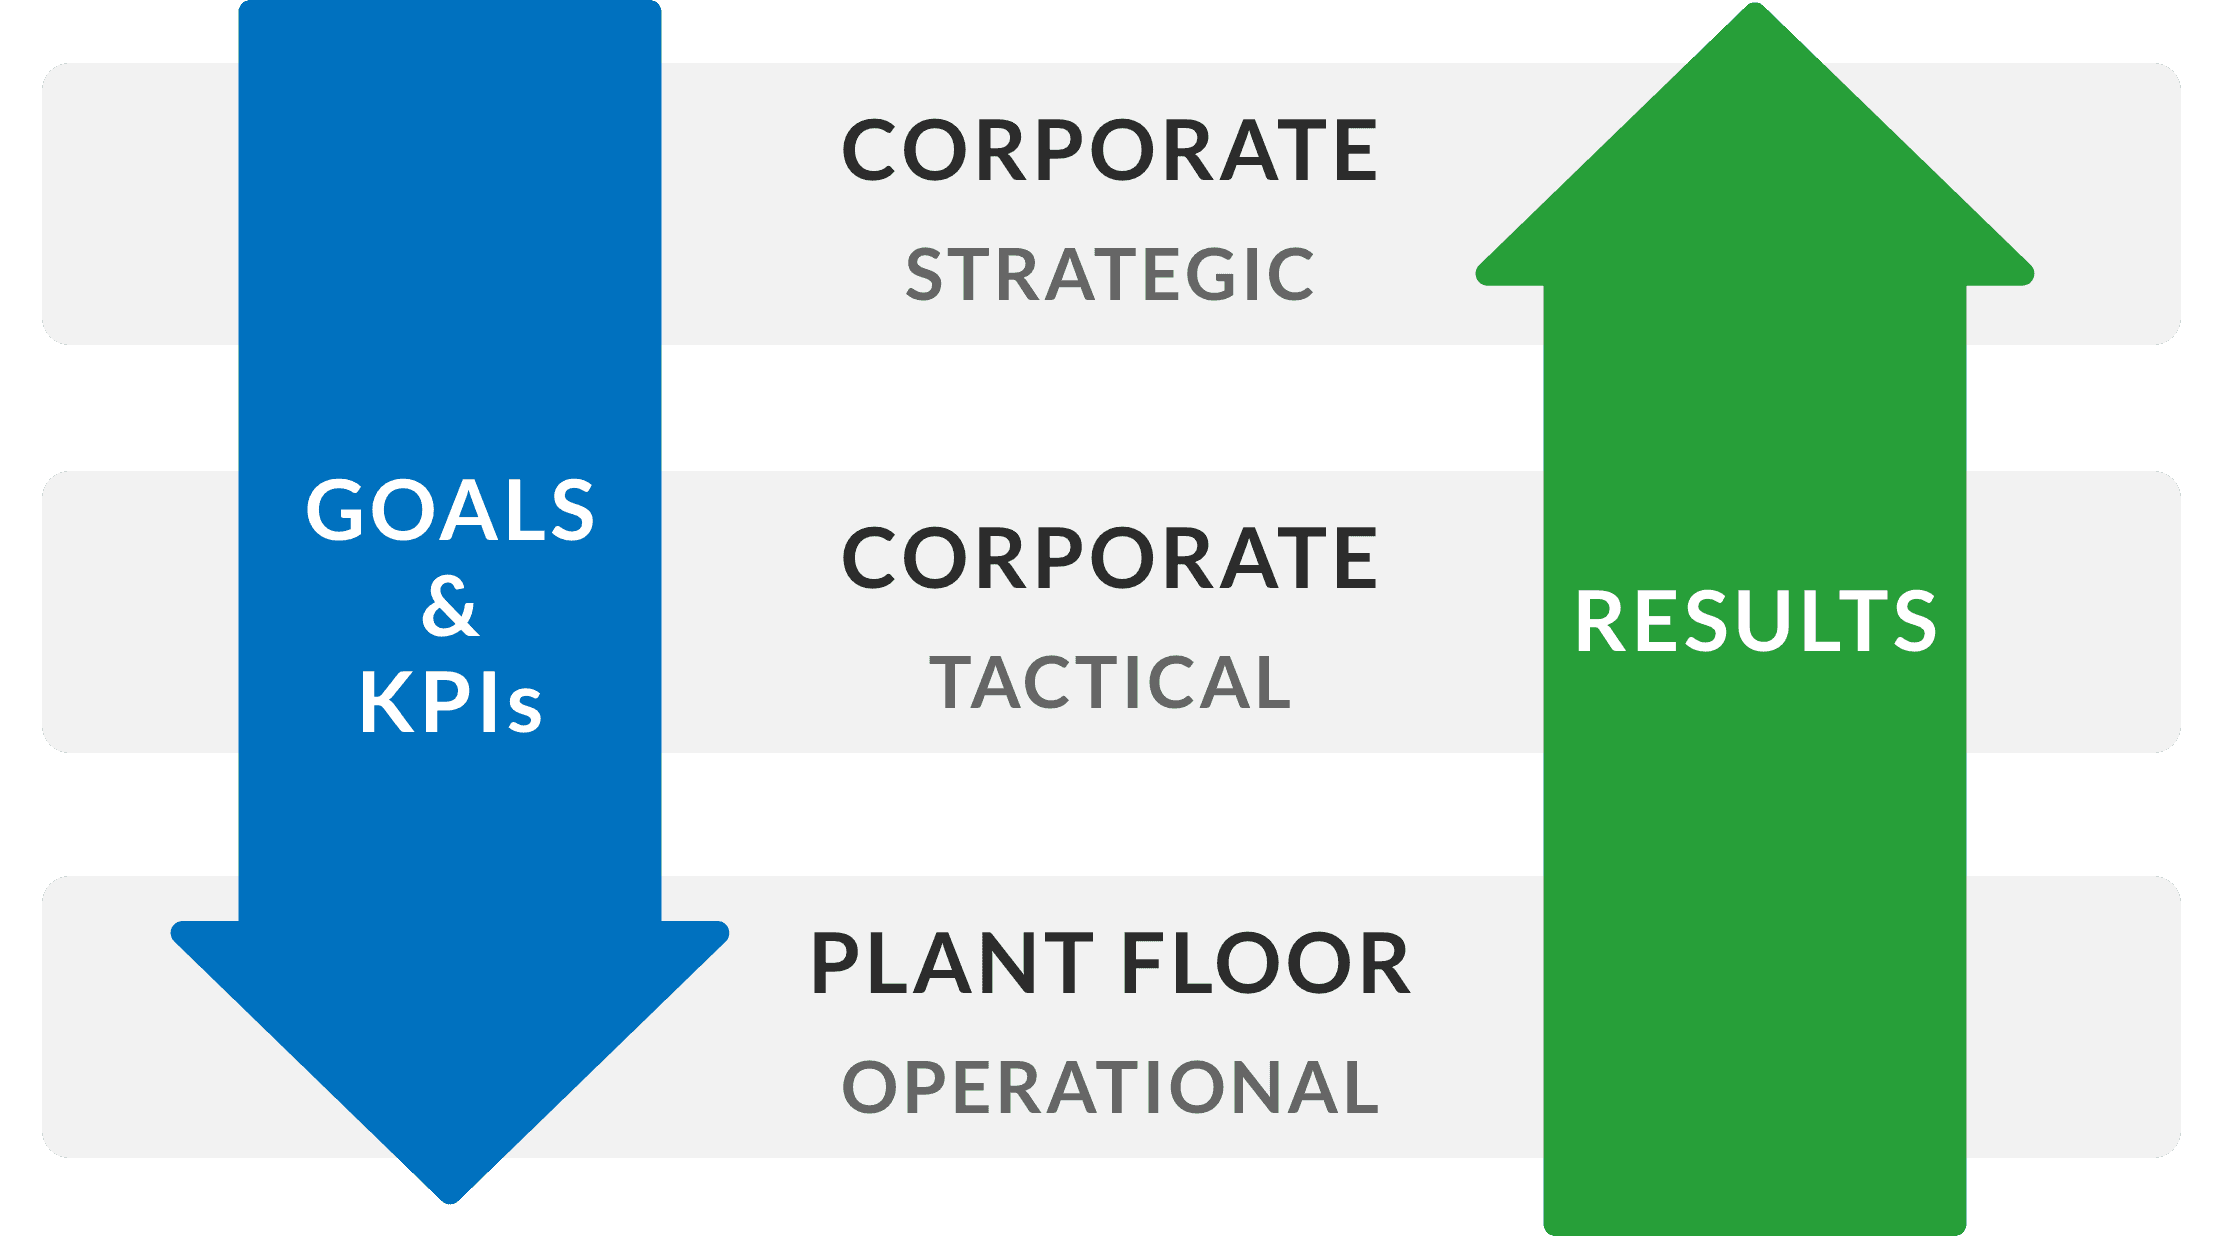 Hoshin Kanri aligns corporate strategy with plant floor actions to increase productivity and decrease waste